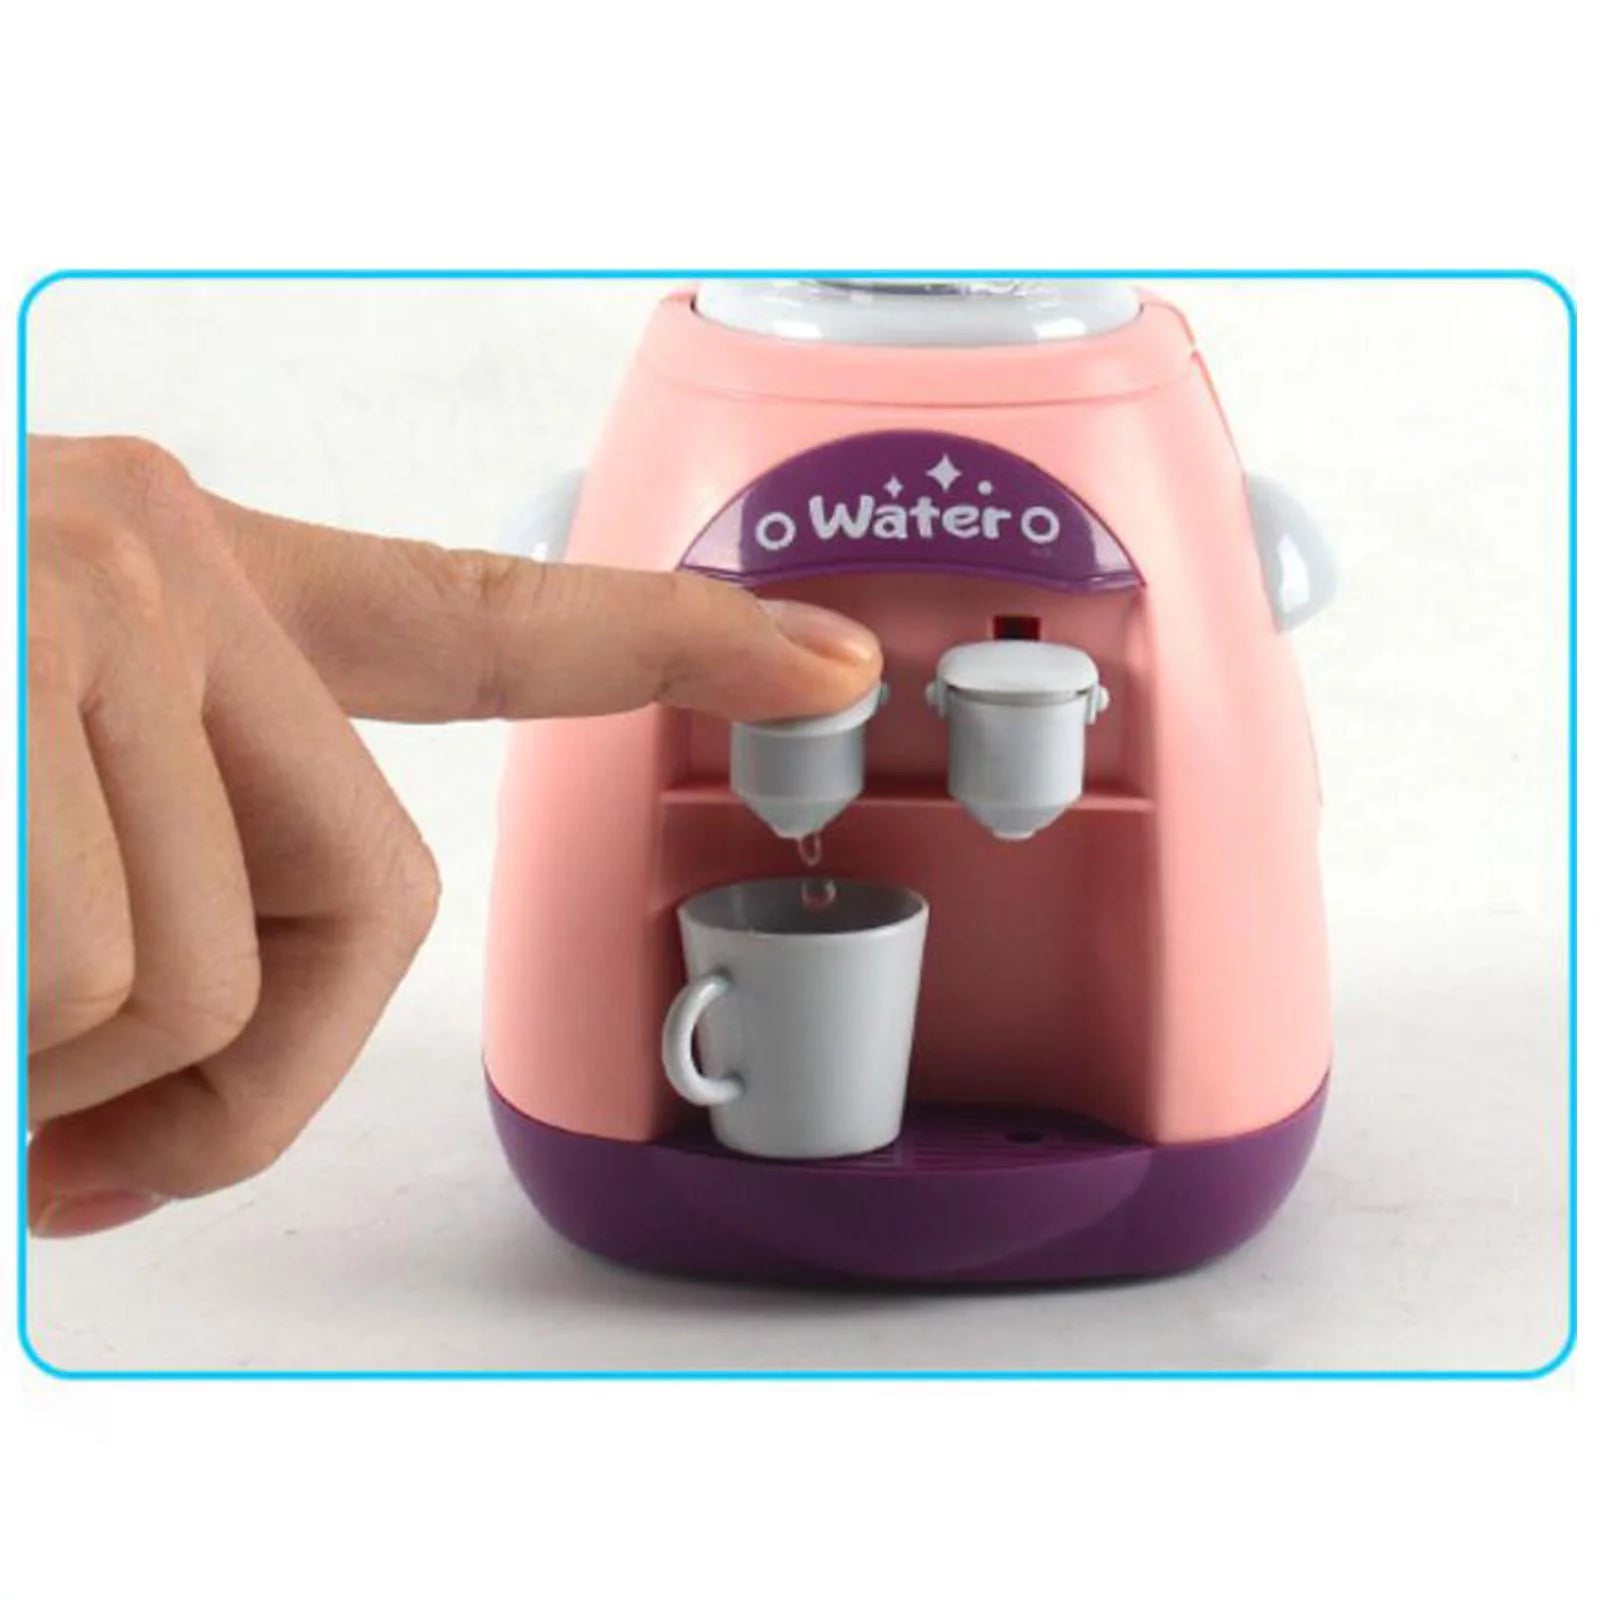 Dual Faucet Mini Water Dispenser, Beverage Dispenser Toy, Easily Press Role Playing Drinking Dispenser Toy, Cute Educational Water Drinking Fountain Toy for Kids, Simulation Water Dispenser, Detachable Double Outlet Kids Water Dispenser for Outdoor Play